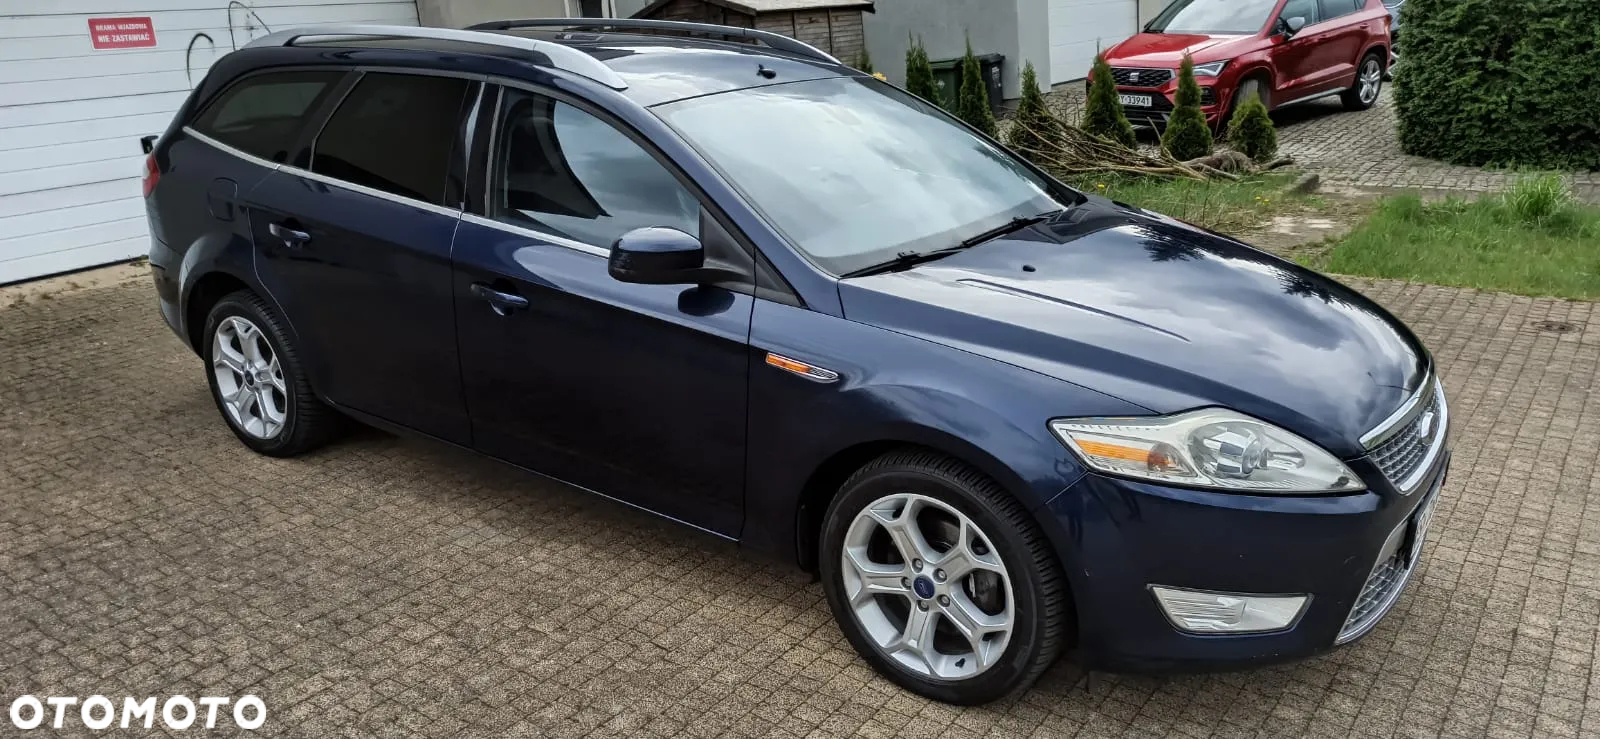 Ford Mondeo 2.0 TDCi Business Edition - 20